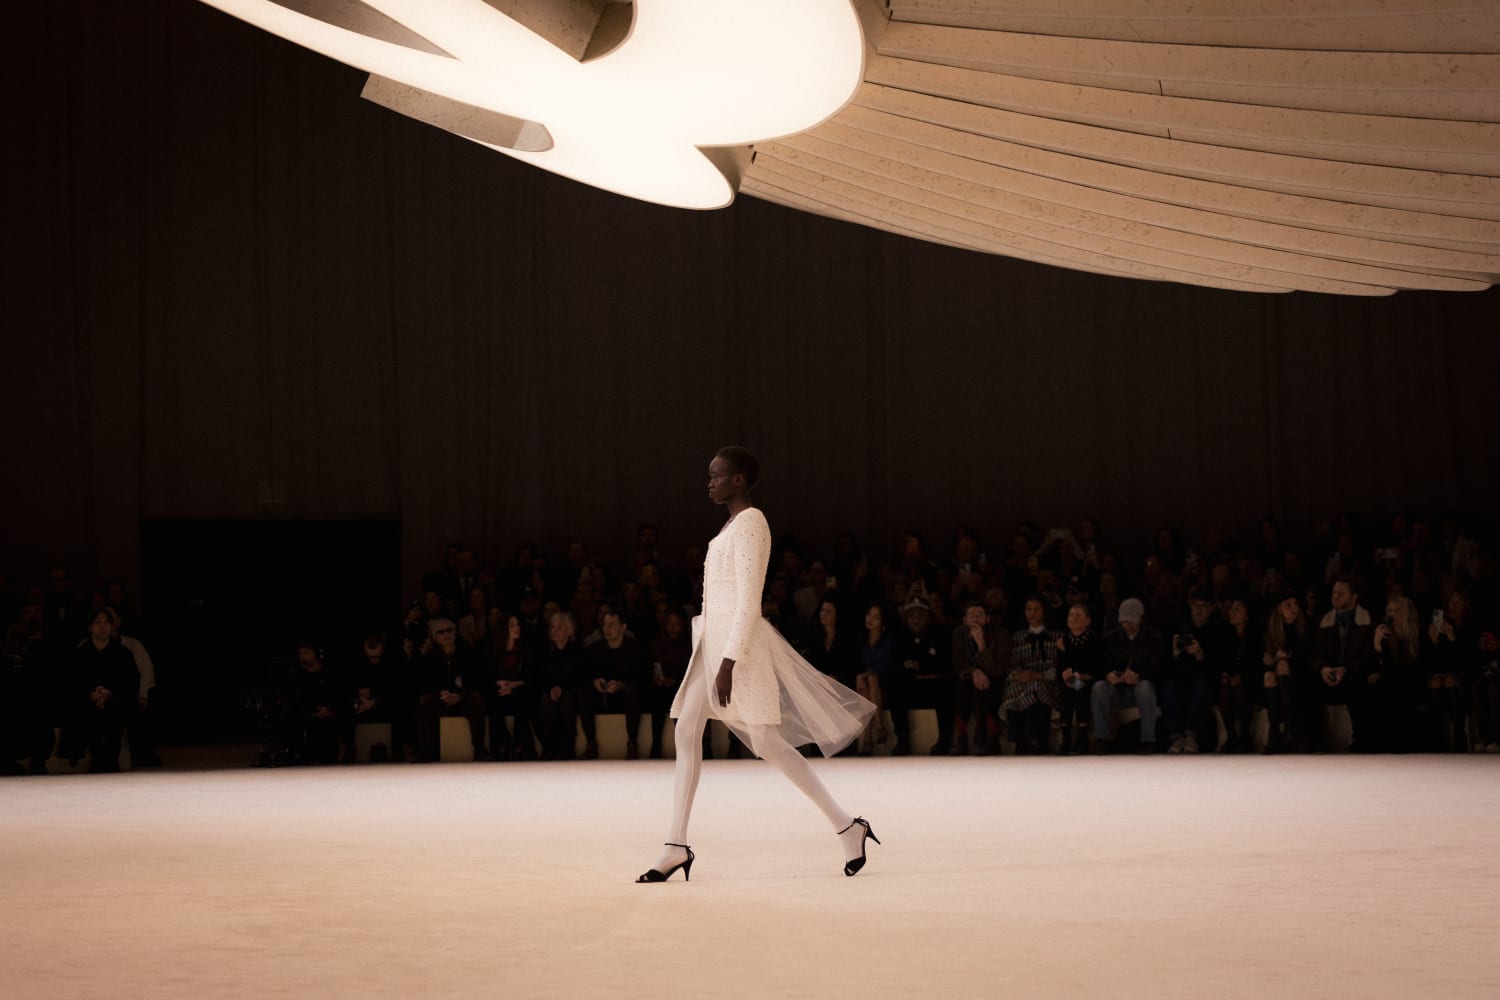 Chanel runway show. Large Chanel logo emblazoned on the ceiling with a model walking in a white gown.